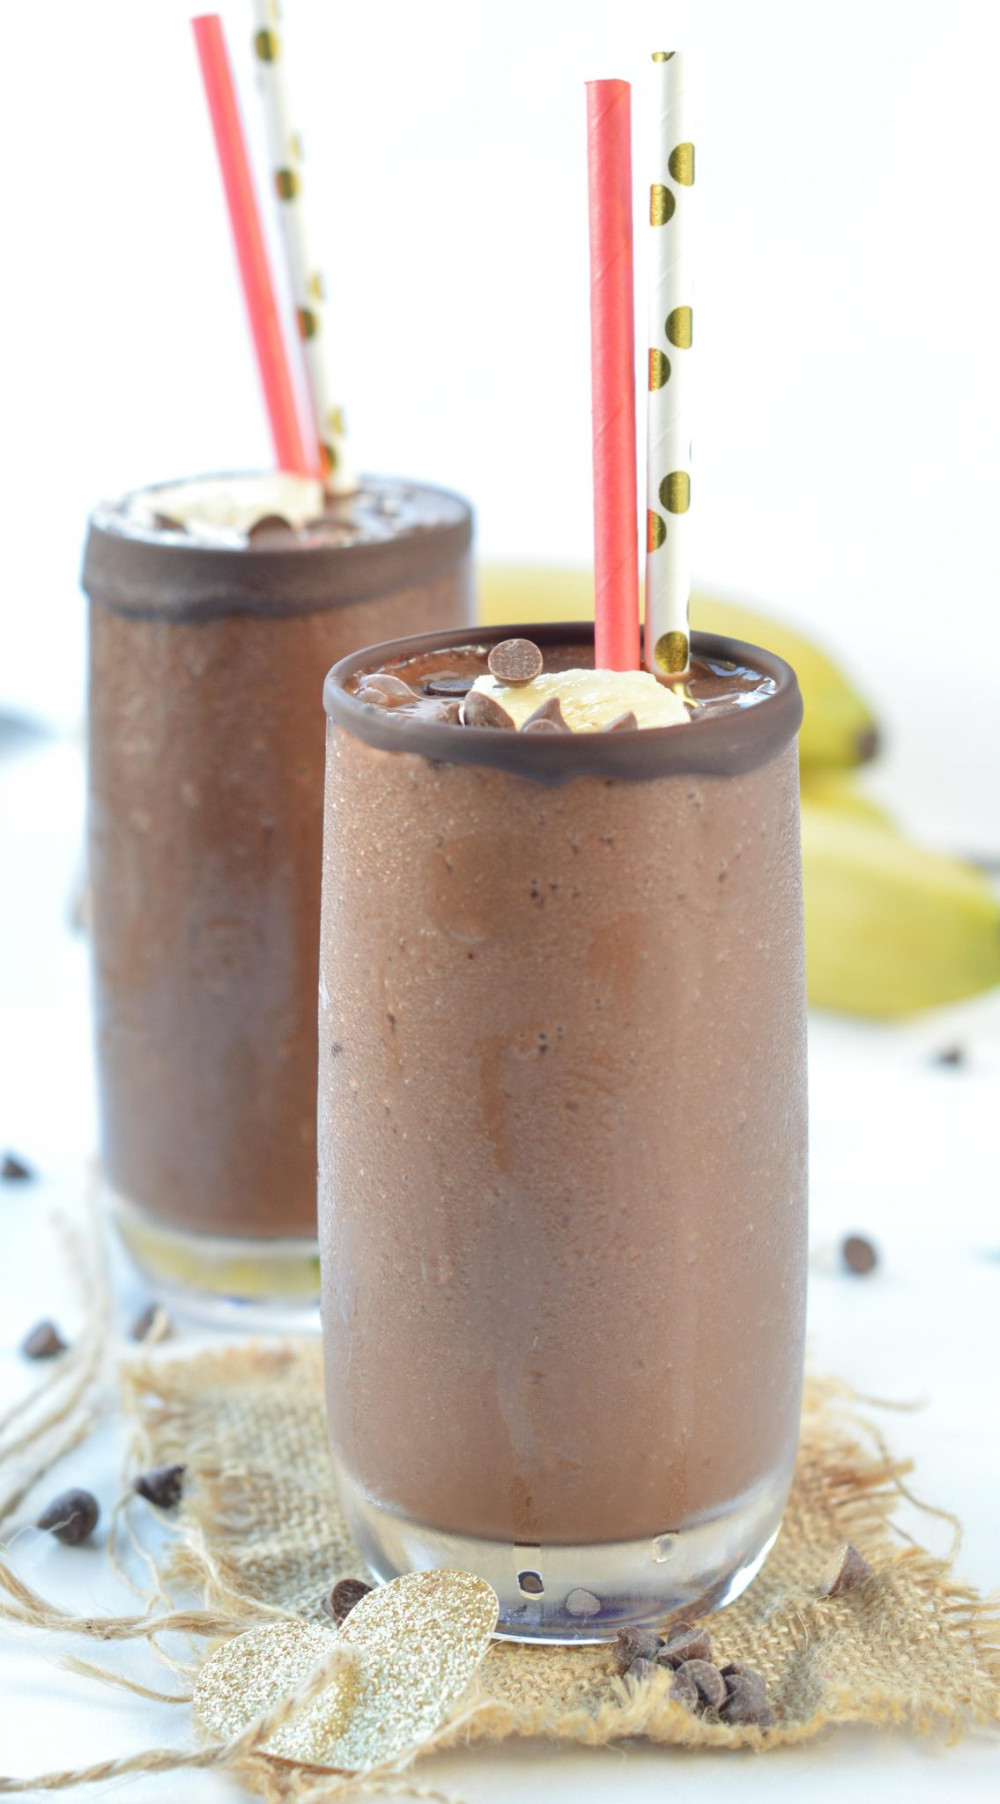 Healthy Smoothies With Almond Milk
 Healthy Chocolate banana smoothie